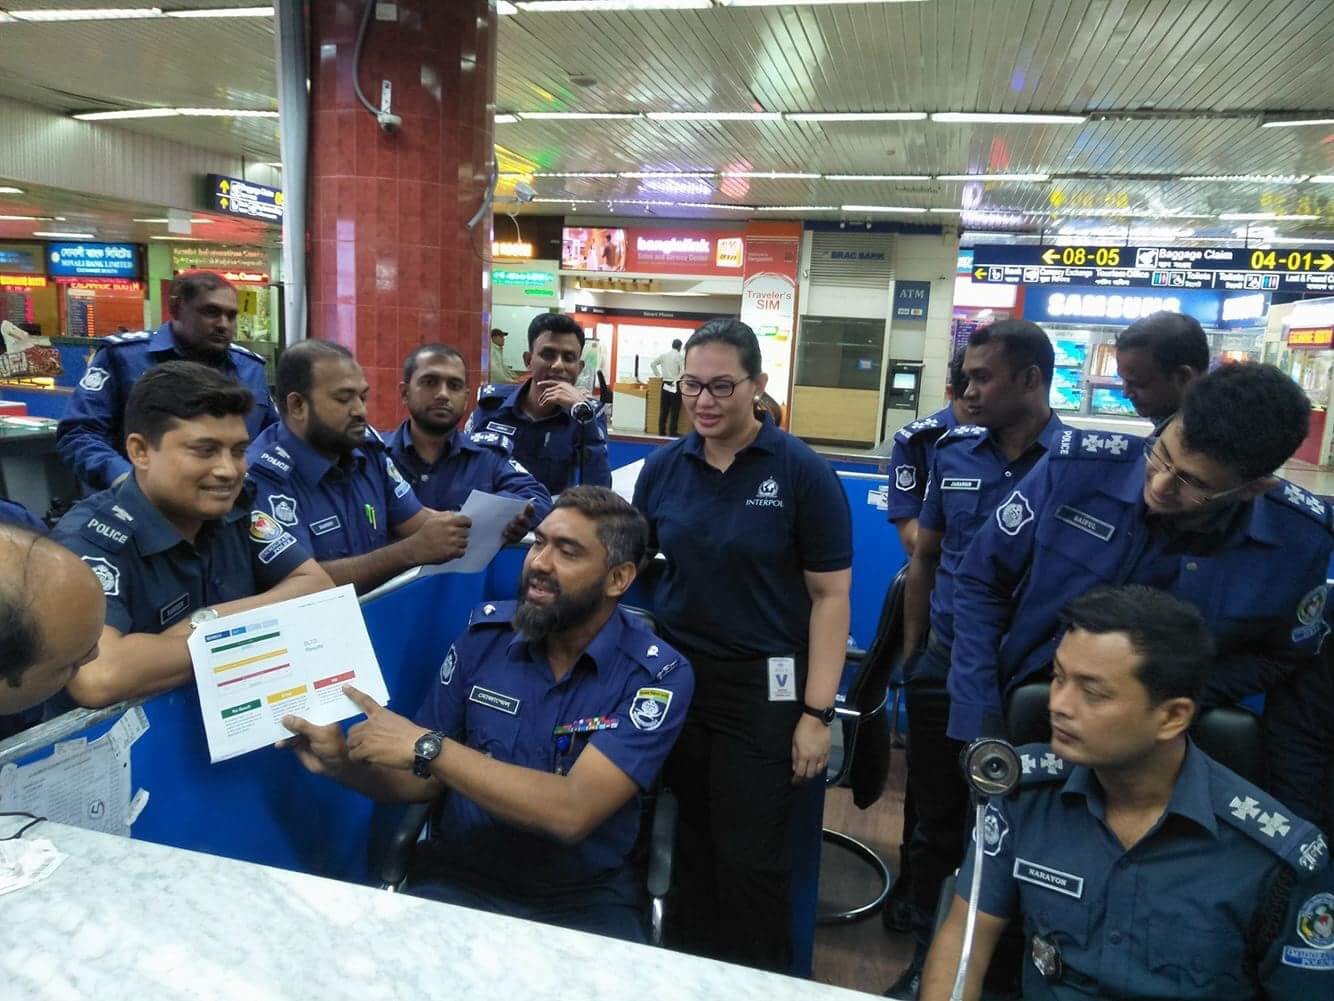 Trainer Mozammel Hussein giving a briefing on Operation Mandala at the counters in Dhaka, Bangladesh